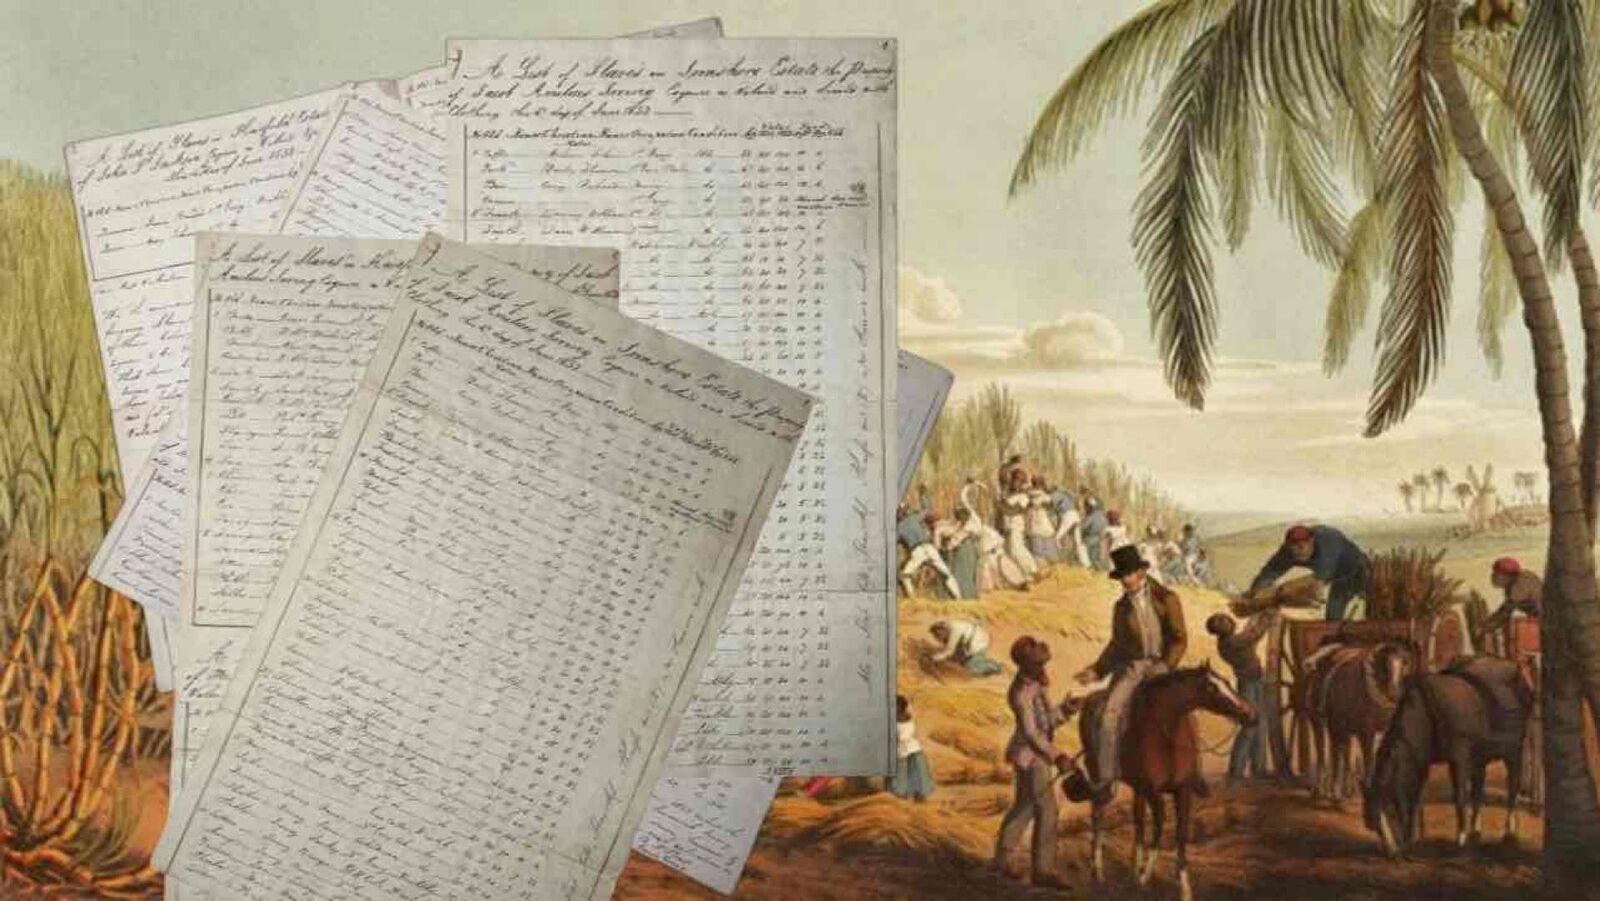 1832 Inventory of Almost 200 Enslaved People on 3 Jamaican Sugar Plantations